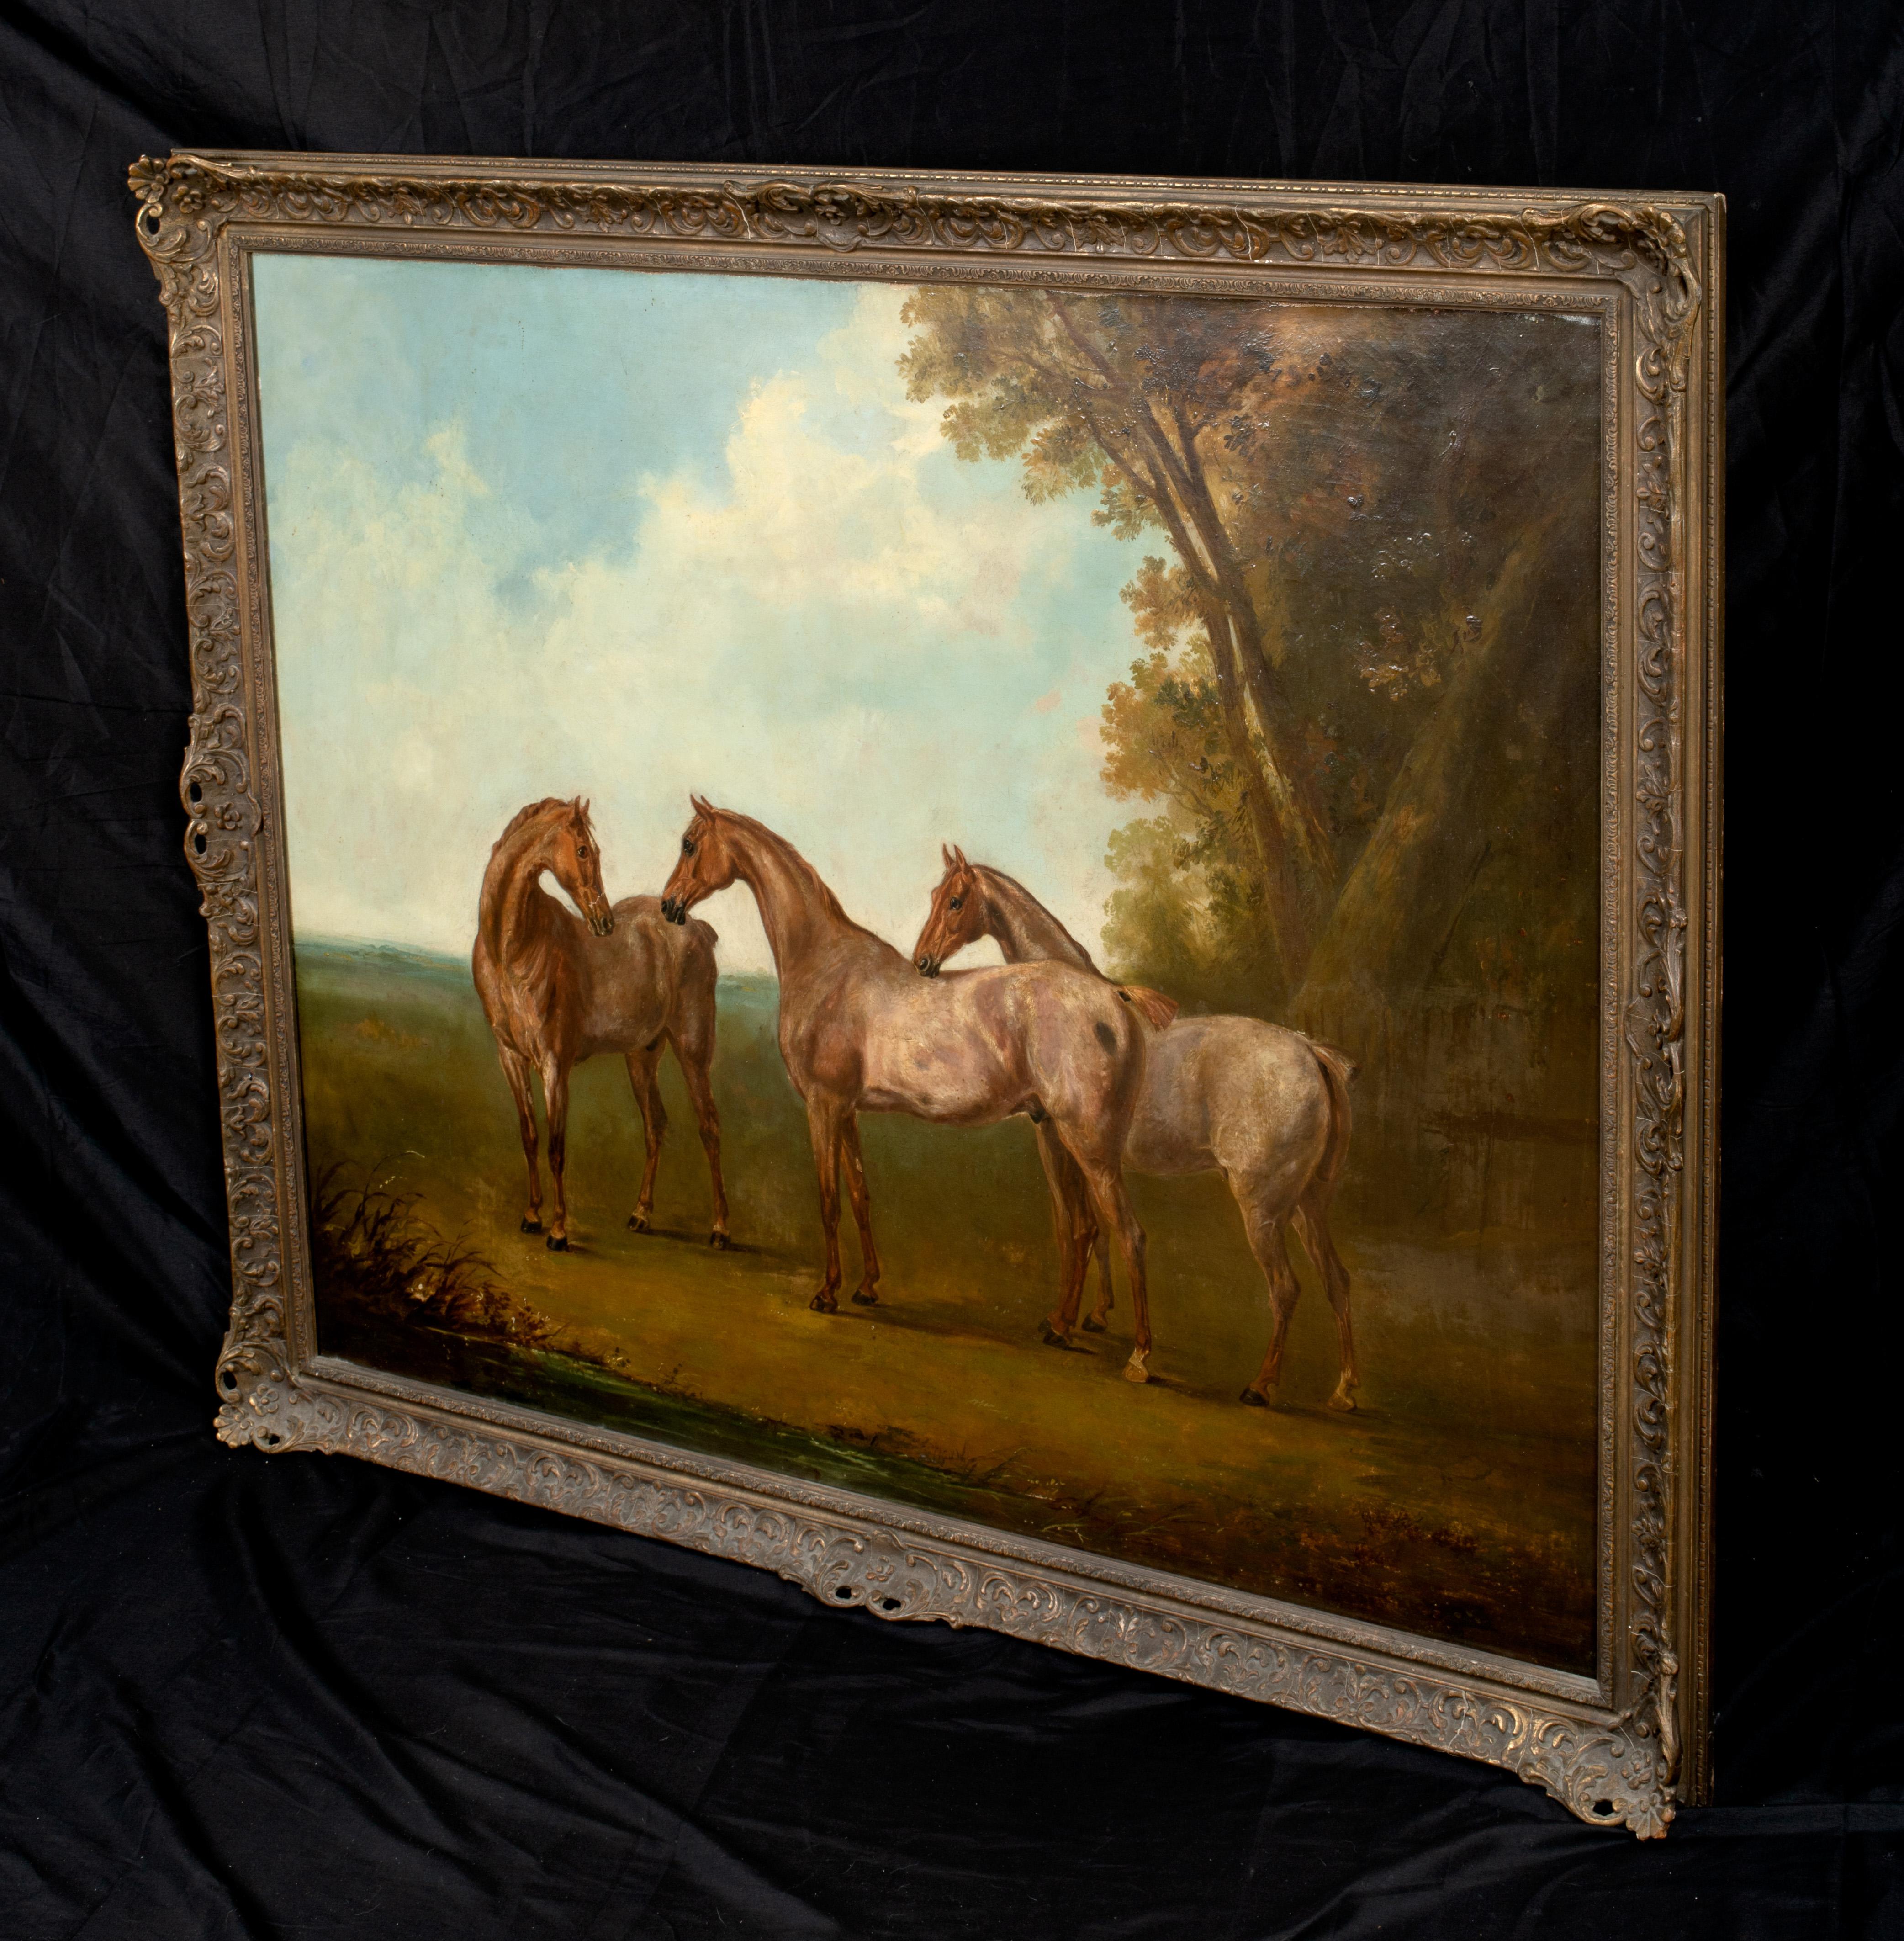 The Bay Hunters In a Landscape, 19th Century 

circle fo John E. FERNELEY (1782-1860) - Rare huge circa 1850 equestrian study

Large 19th Century English landscape with three bay hunters in an opening, oil on canvas. Excellent quality and condition,